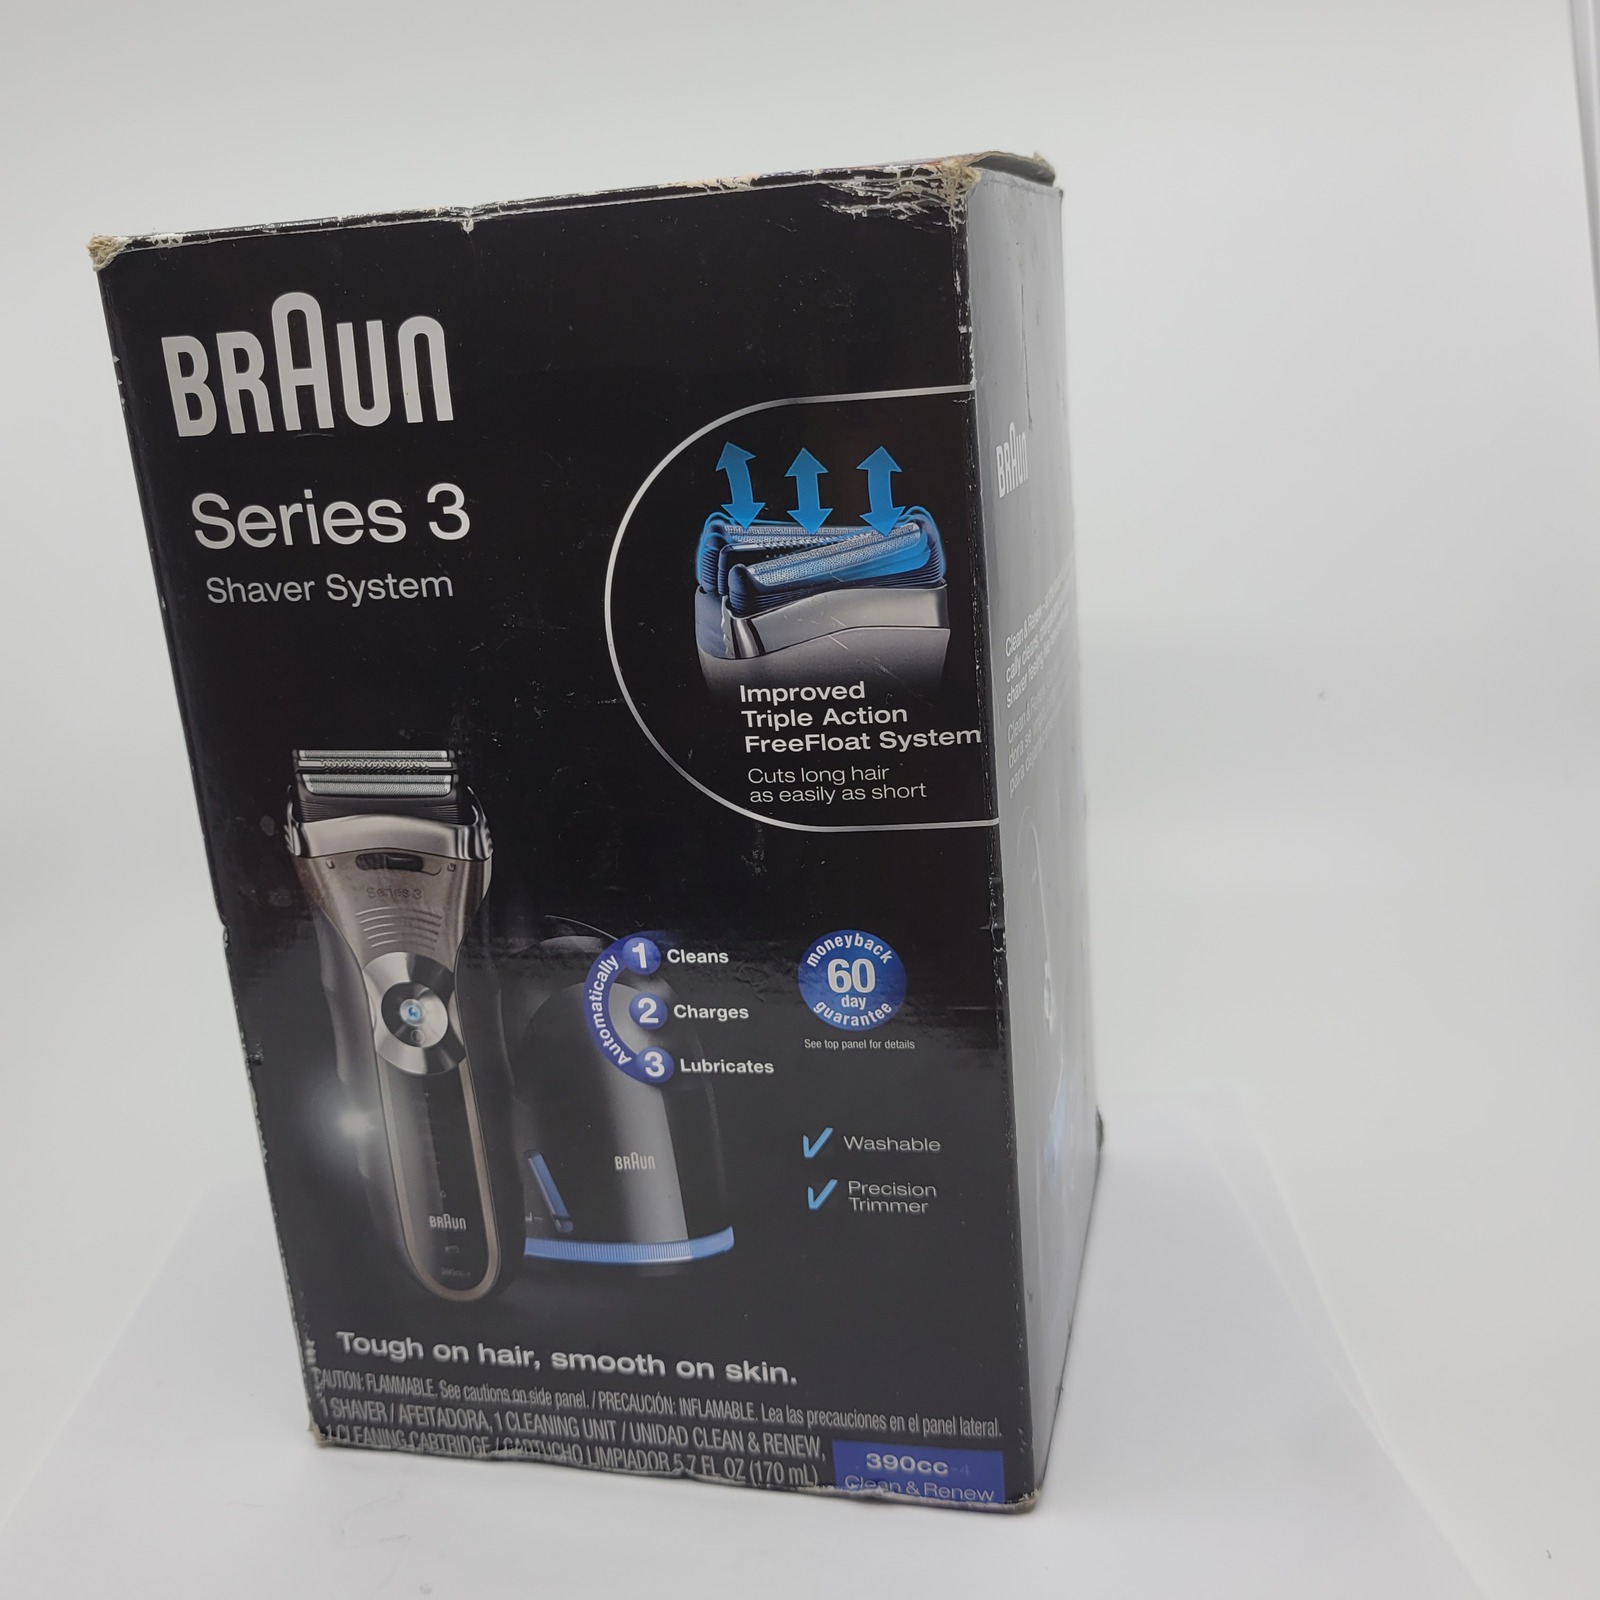 Primary image for Braun Series 3 390cc4 Cordless Rechargeable Men's Self-Cleaning Electric Shaver 